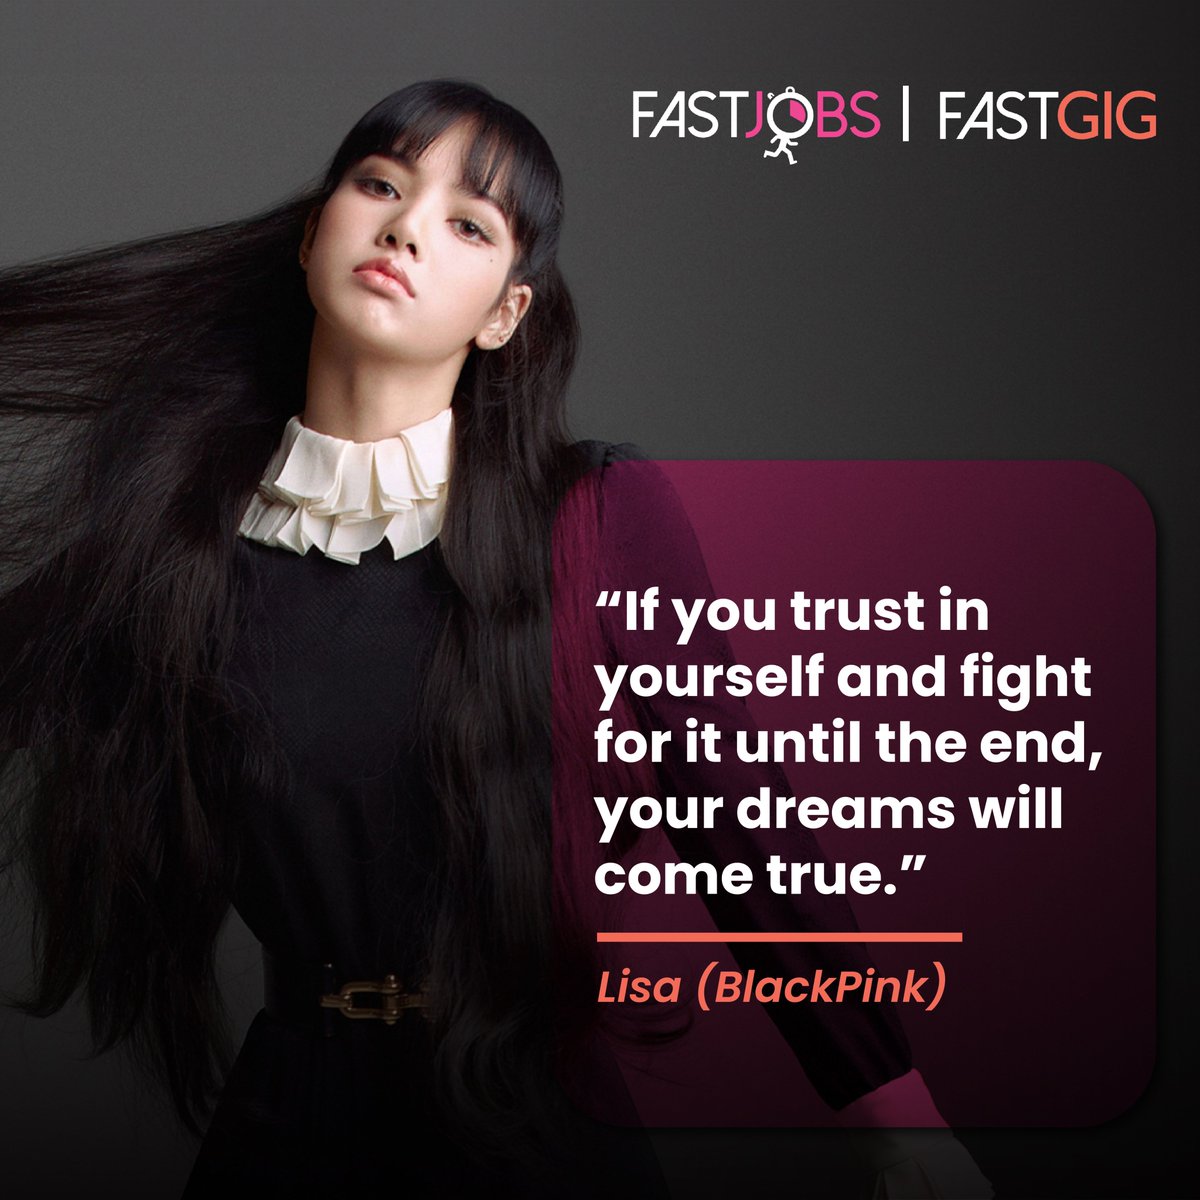 Believe in yourself and fight for your career dreams just like Lisa from Blackpink says. Trust the journey and your hard work will pay off. 🌟 
#CareerGoals #Inspiration #lisa #lalisa #blackpink #blackpinklisa #fastgig #fastjobs